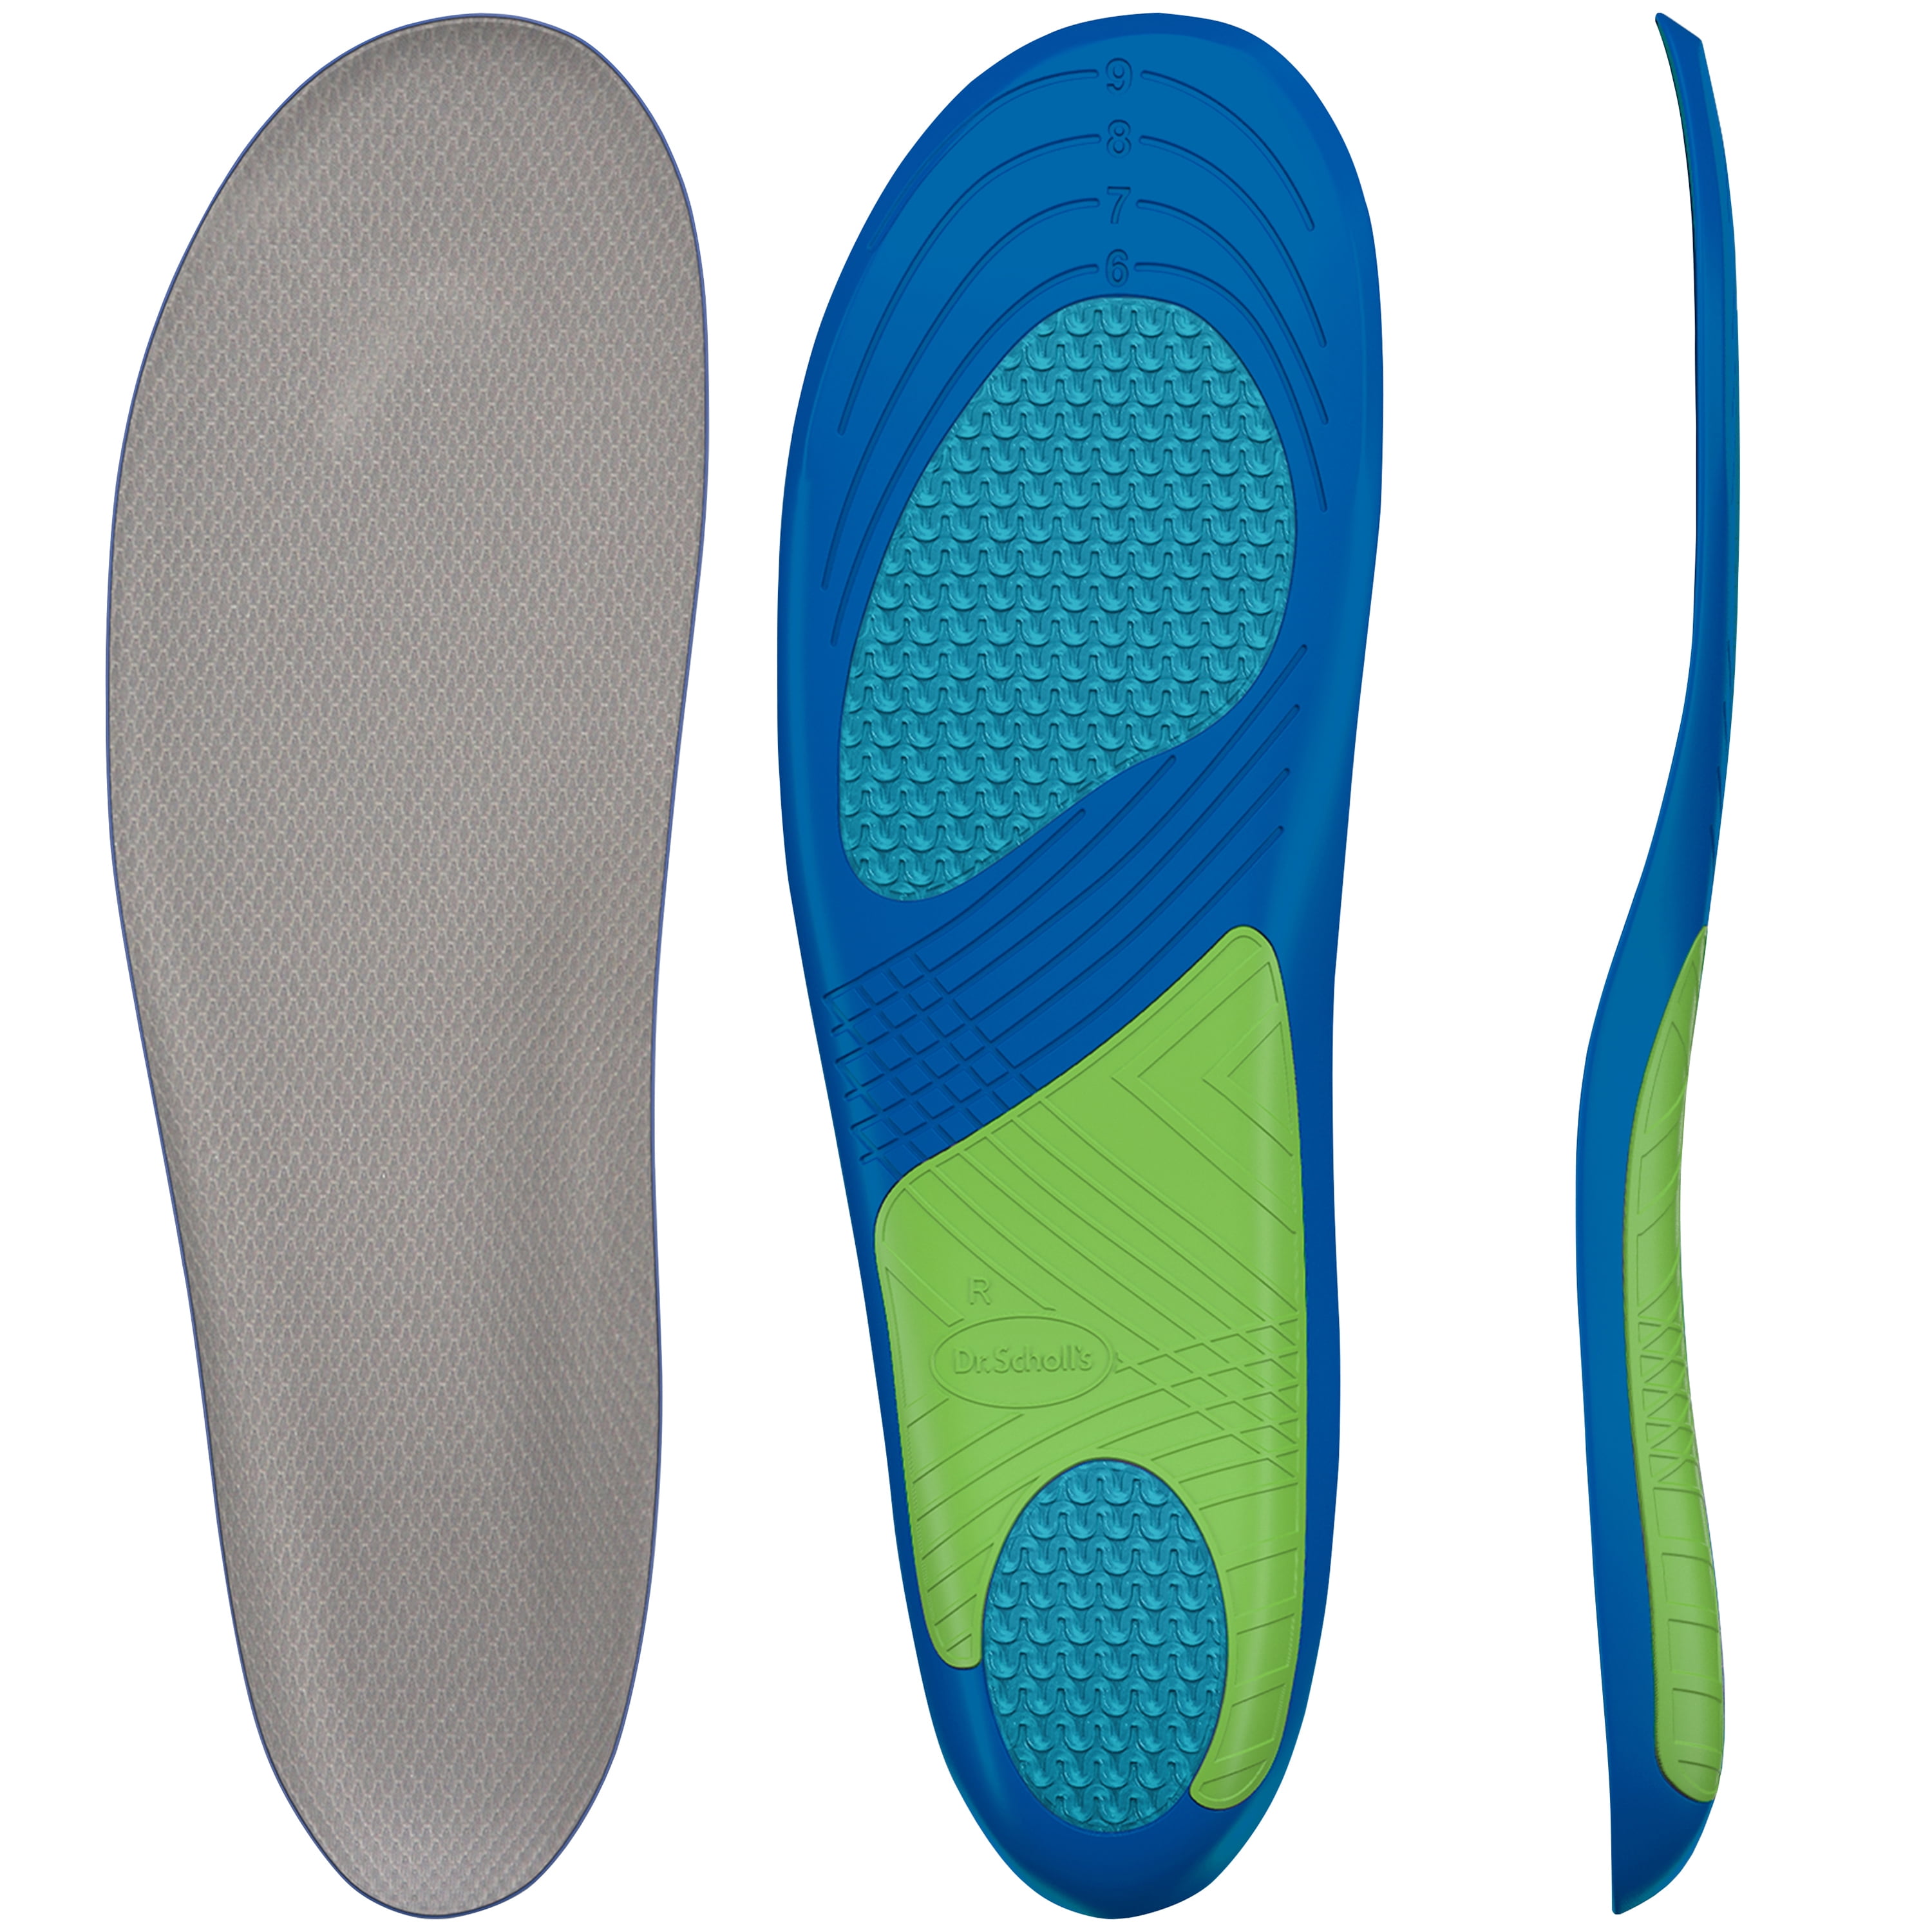  VSUDO Arch Support Sports Shoe Insoles, Shock Absorption Shoe  Inserts for Men or Women, High Elastic Athletic Running Insoles for Sneakers  or Running Shoes - L : Health & Household